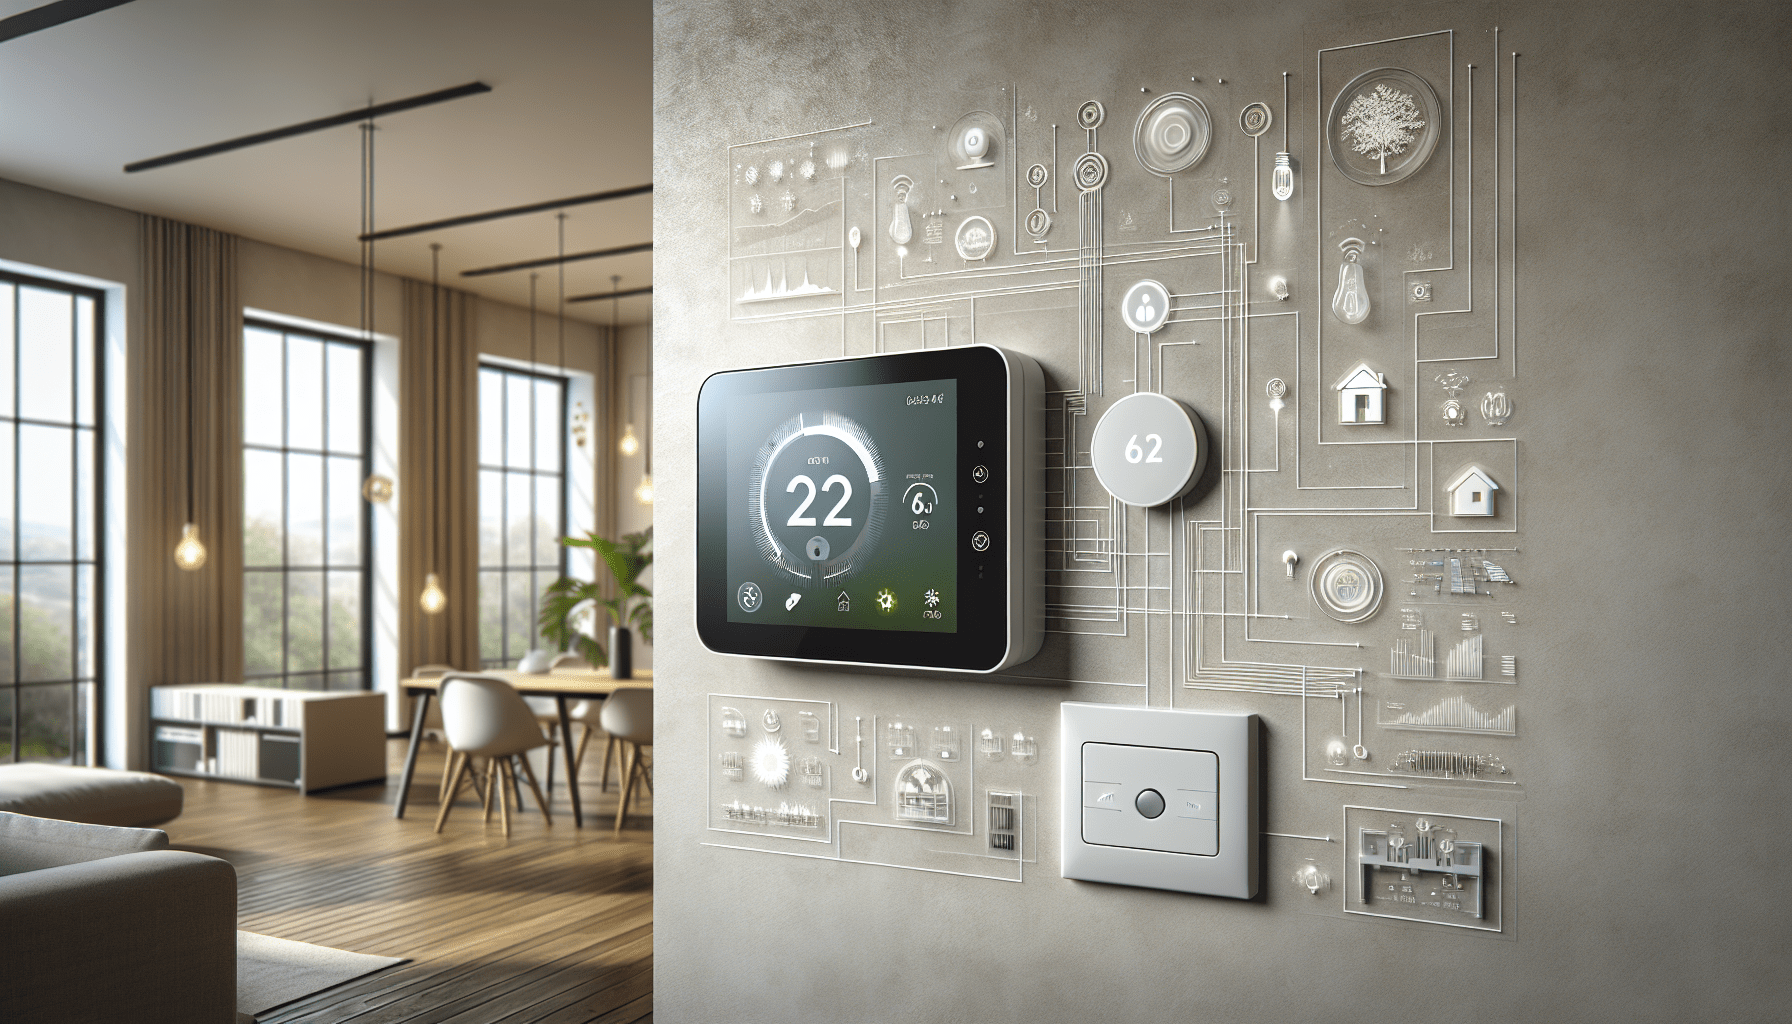 How Can I Make My Home More Energy-efficient With Technology?